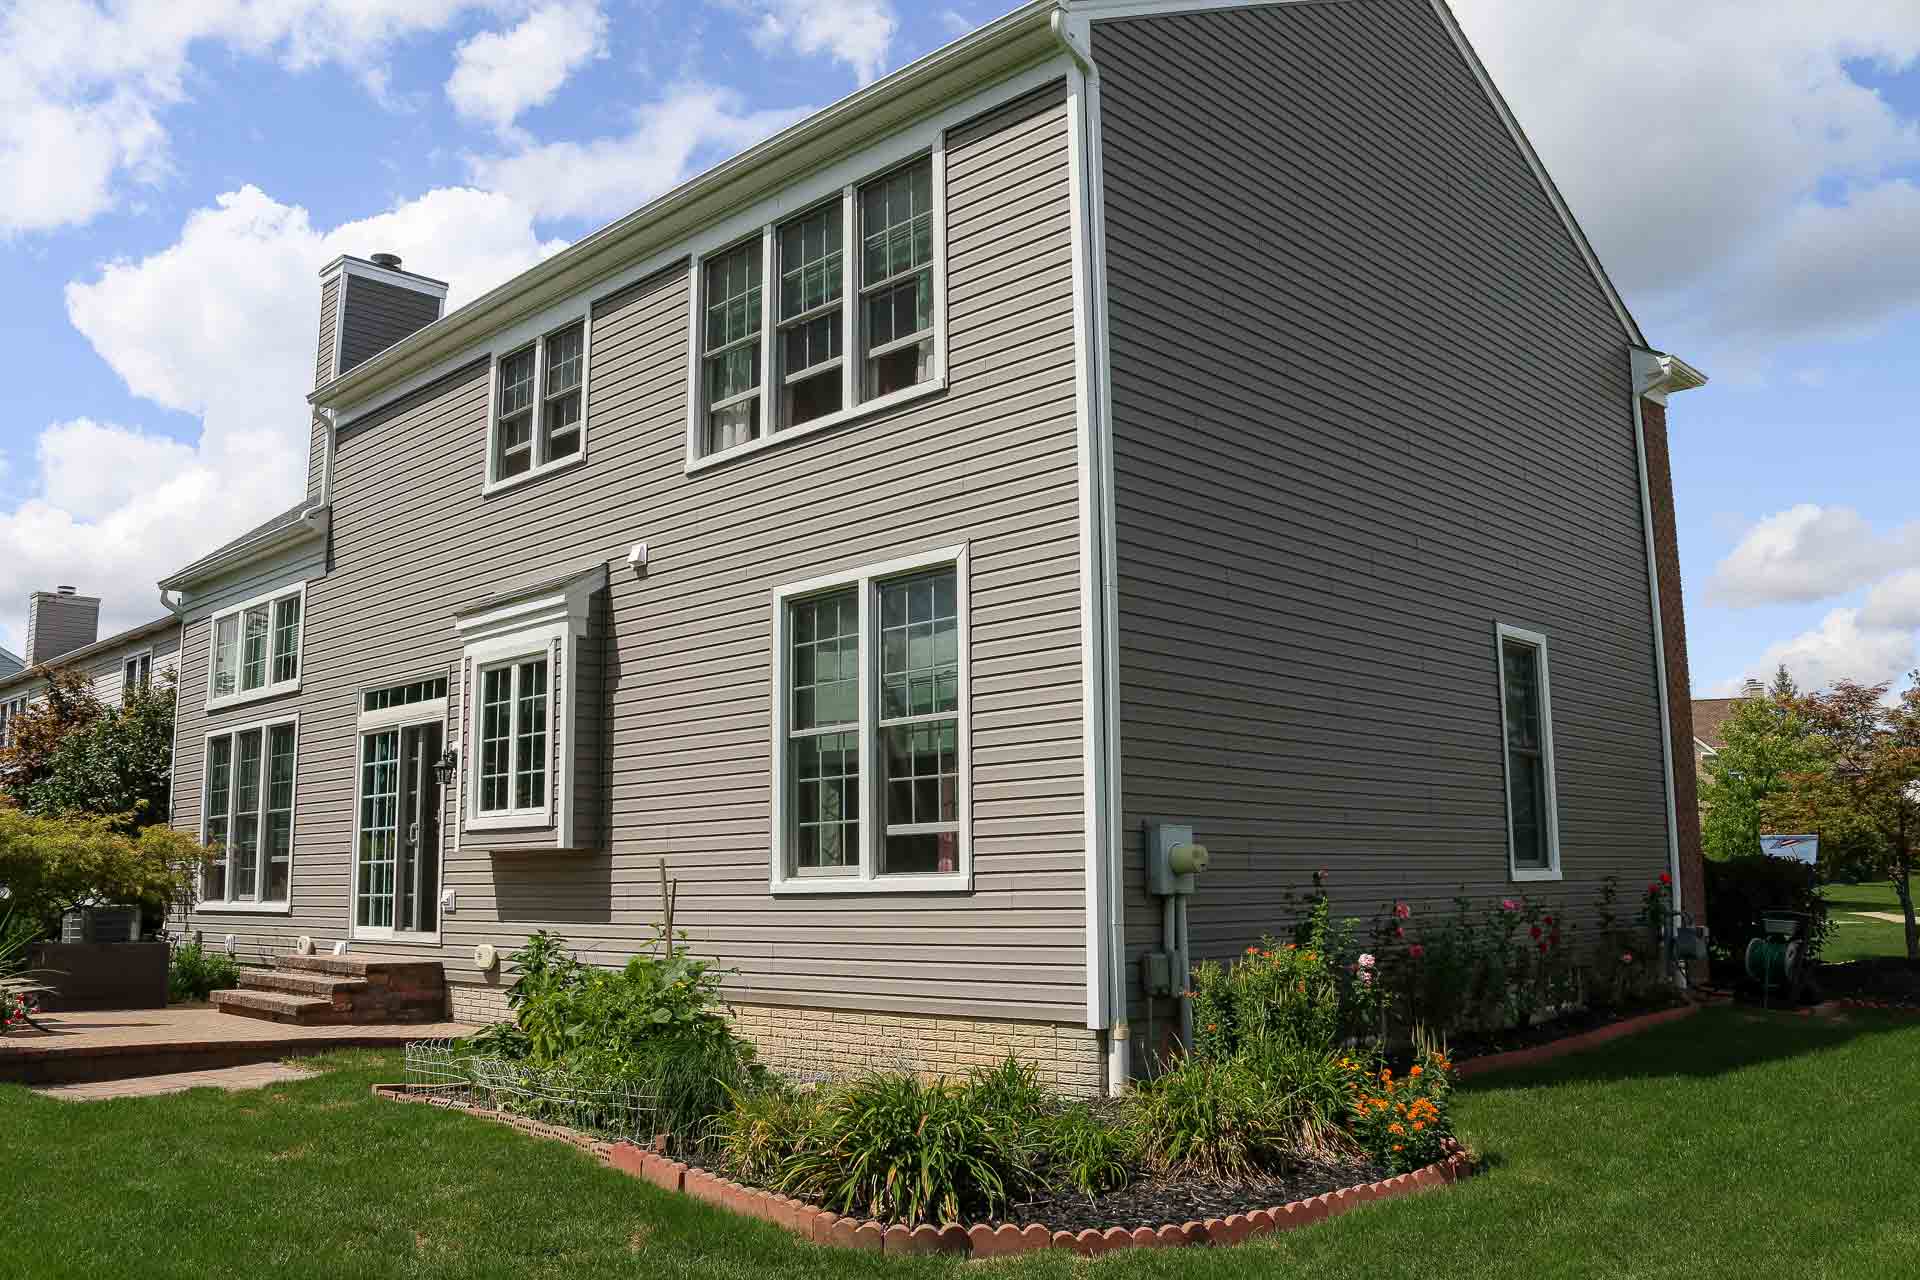 A large home with white-framed windows and new vinyl siding in a gray color.